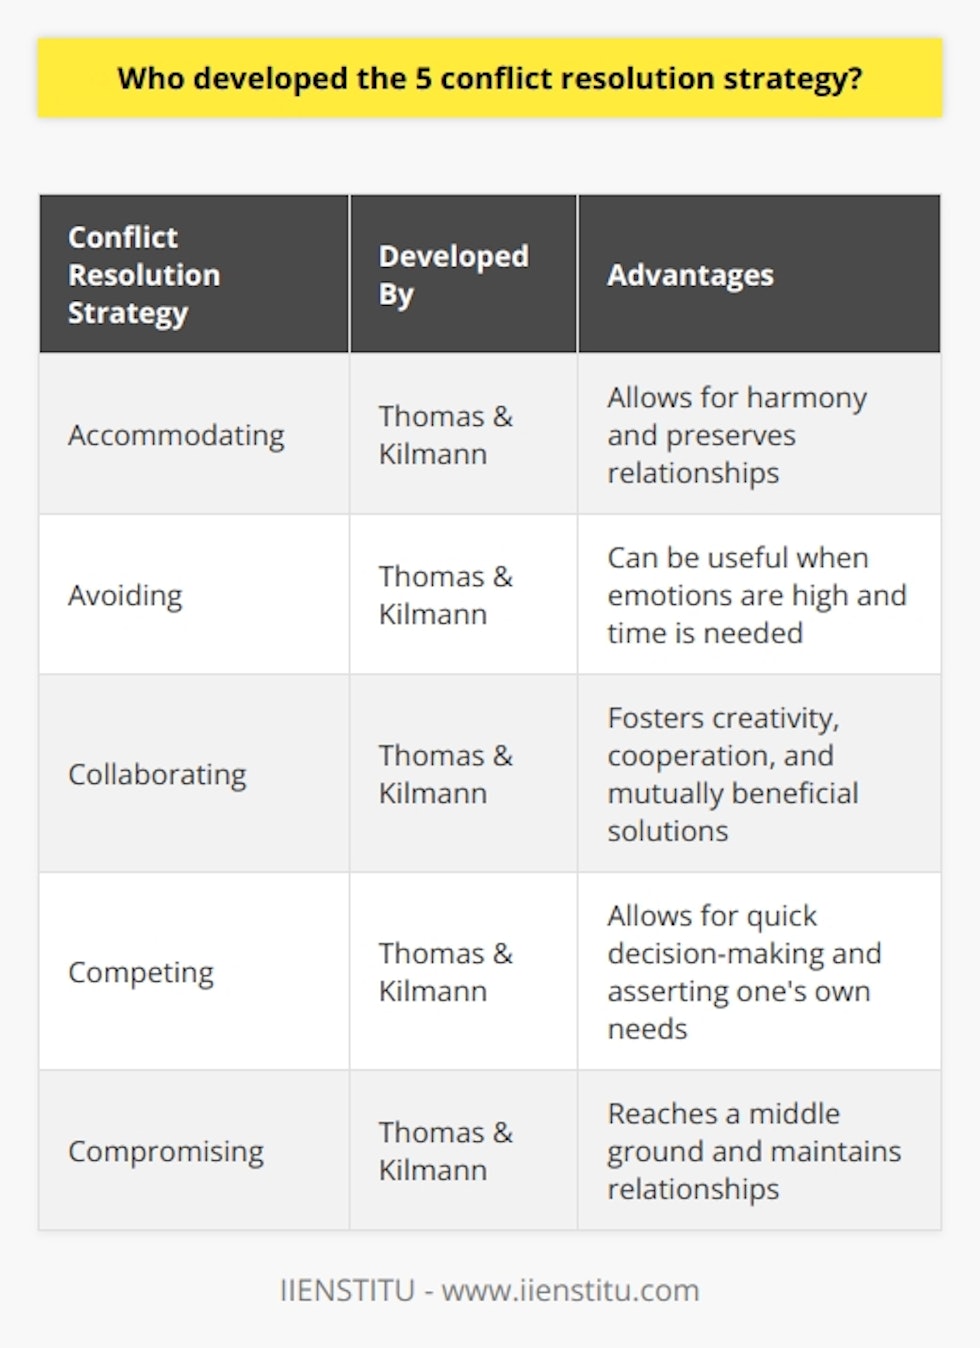 The Thomas-Kilmann Conflict Model is widely recognized and utilized in the field of conflict resolution. It provides a valuable framework for understanding and addressing conflicts within organizations and personal relationships. By understanding these five strategies - accommodating, avoiding, collaborating, competing, and compromising - individuals and teams can effectively navigate and resolve conflicts in a way that best suits the situation.It is worth noting that conflict resolution strategies should be chosen based on the specific context and desired outcomes. Each strategy has its own advantages and disadvantages, and the appropriate approach will depend on factors such as the relationship between parties, the importance of maintaining relationships, the urgency of resolving the conflict, and the extent to which each party's needs and concerns need to be addressed.Kenneth Thomas and Ralph Kilmann's contributions to conflict resolution are significant. Their work has provided a valuable framework that has been used in various professional and personal contexts. By understanding and implementing these strategies, individuals and organizations can foster healthier relationships, improve teamwork, and effectively address conflicts that arise.